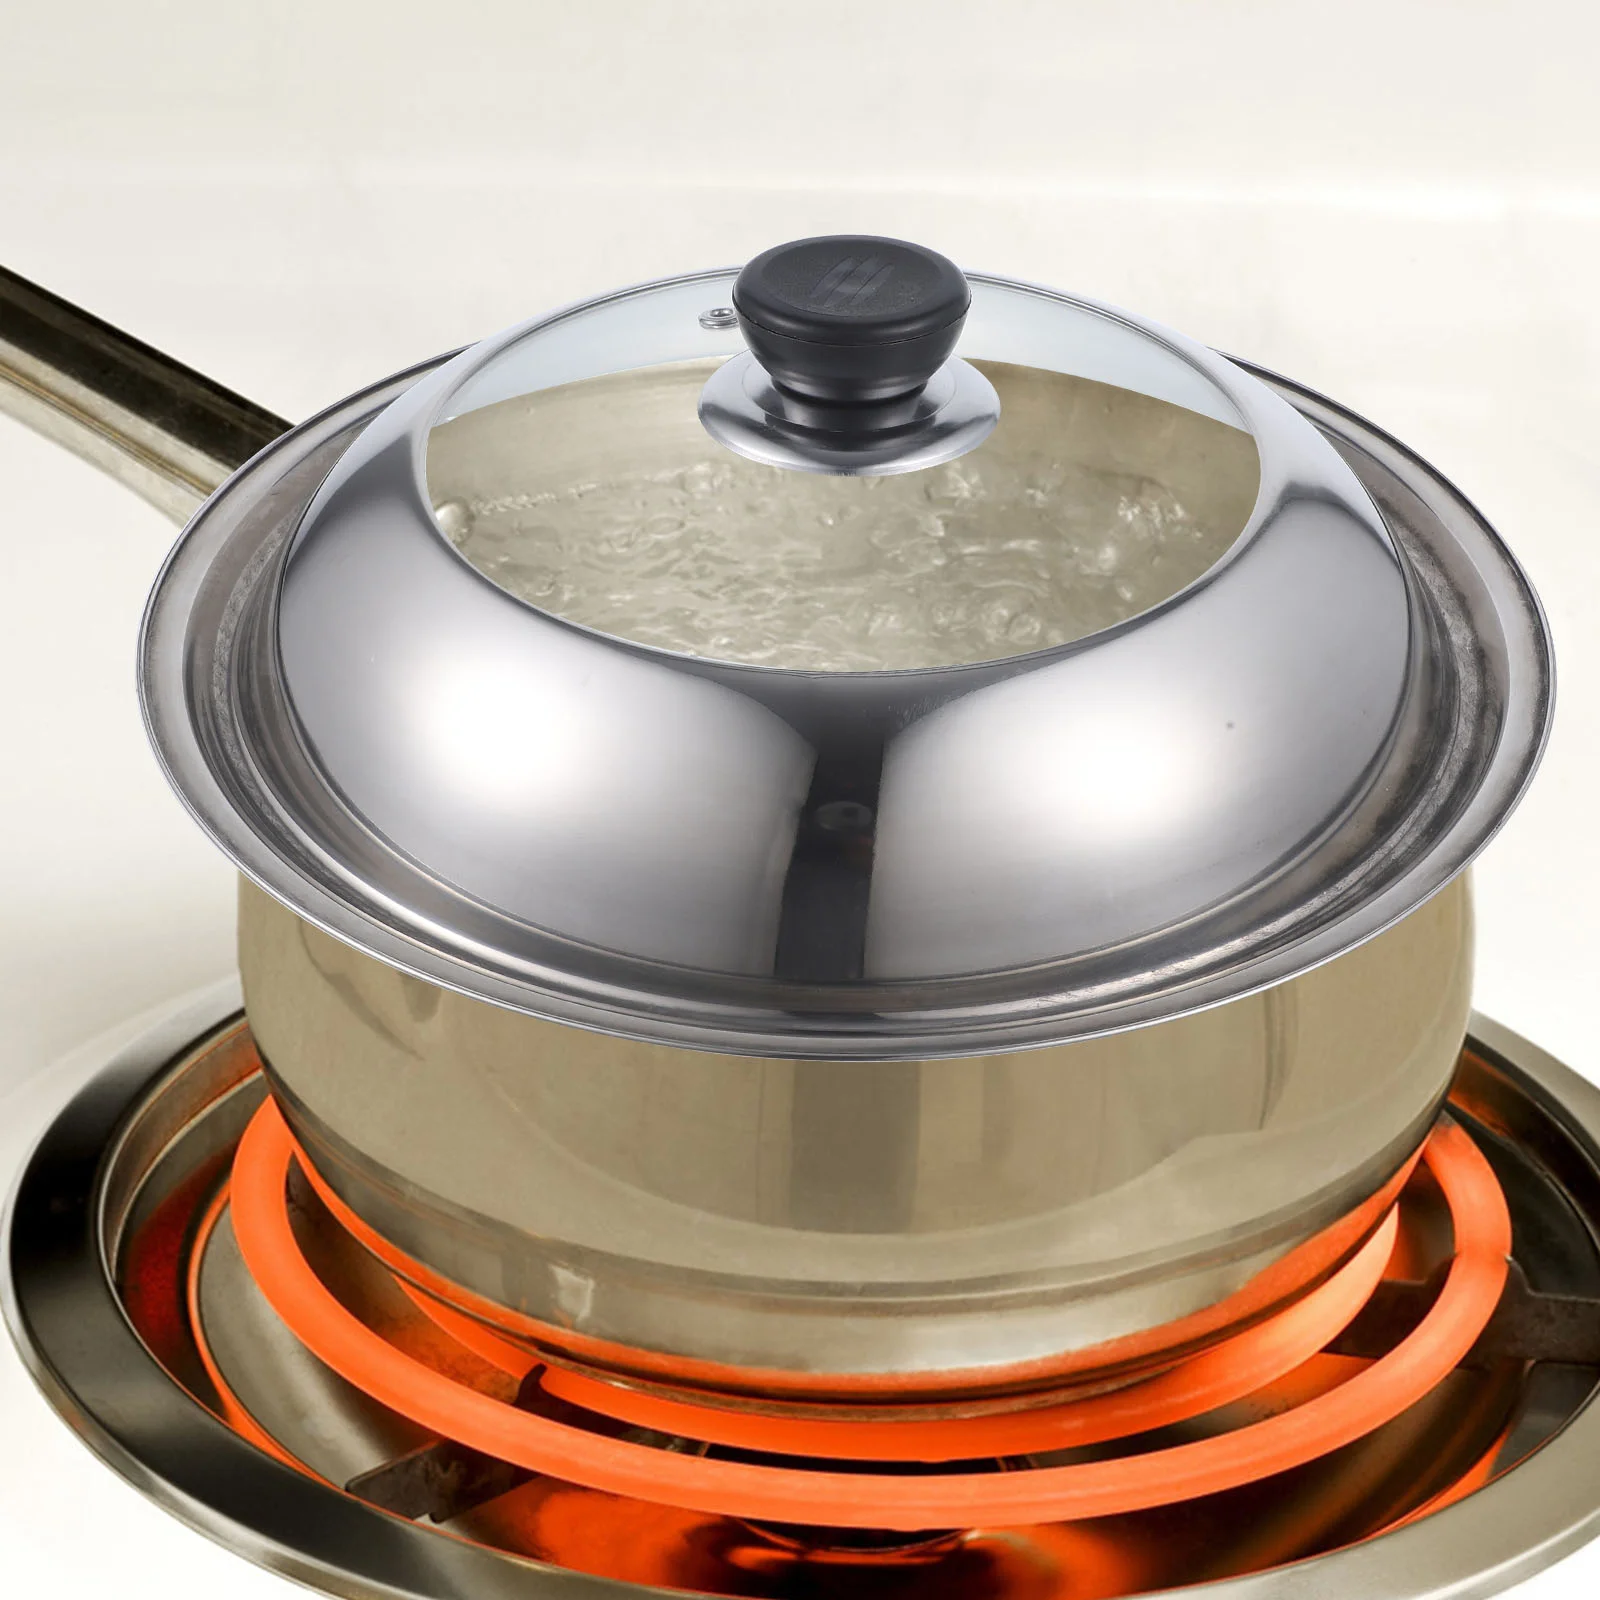 

Cooking Pot Lid Lid Glass Bakeware Lids Visualized Pot Cover Appliance Cookware Cover Stainless Steel Pan Cover